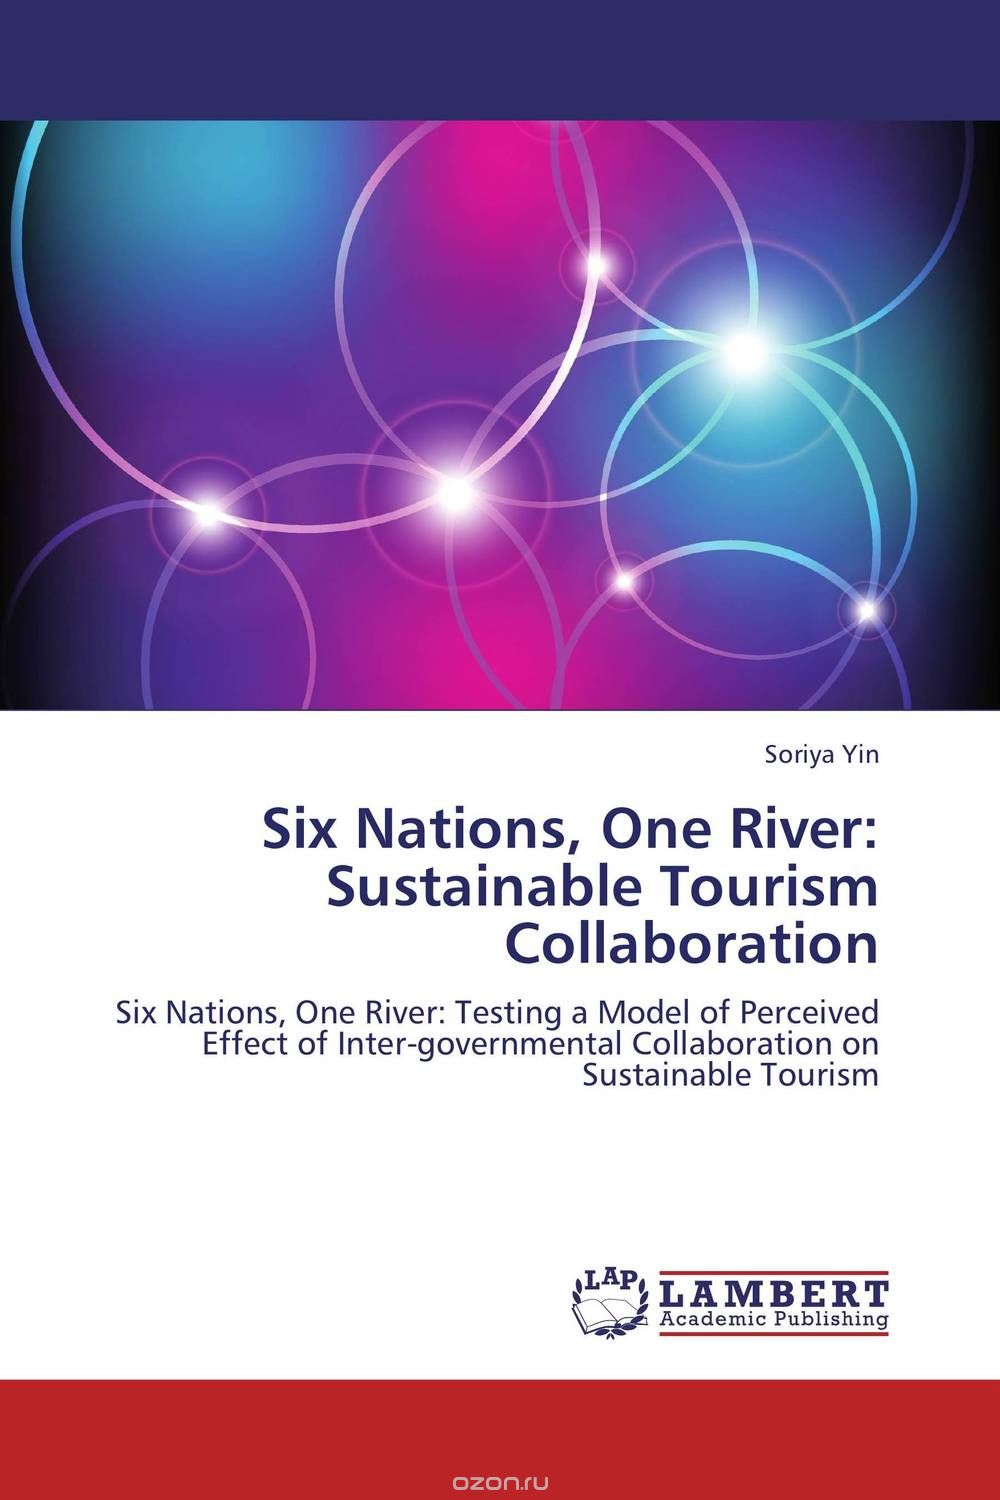 Six Nations, One River: Sustainable Tourism Collaboration